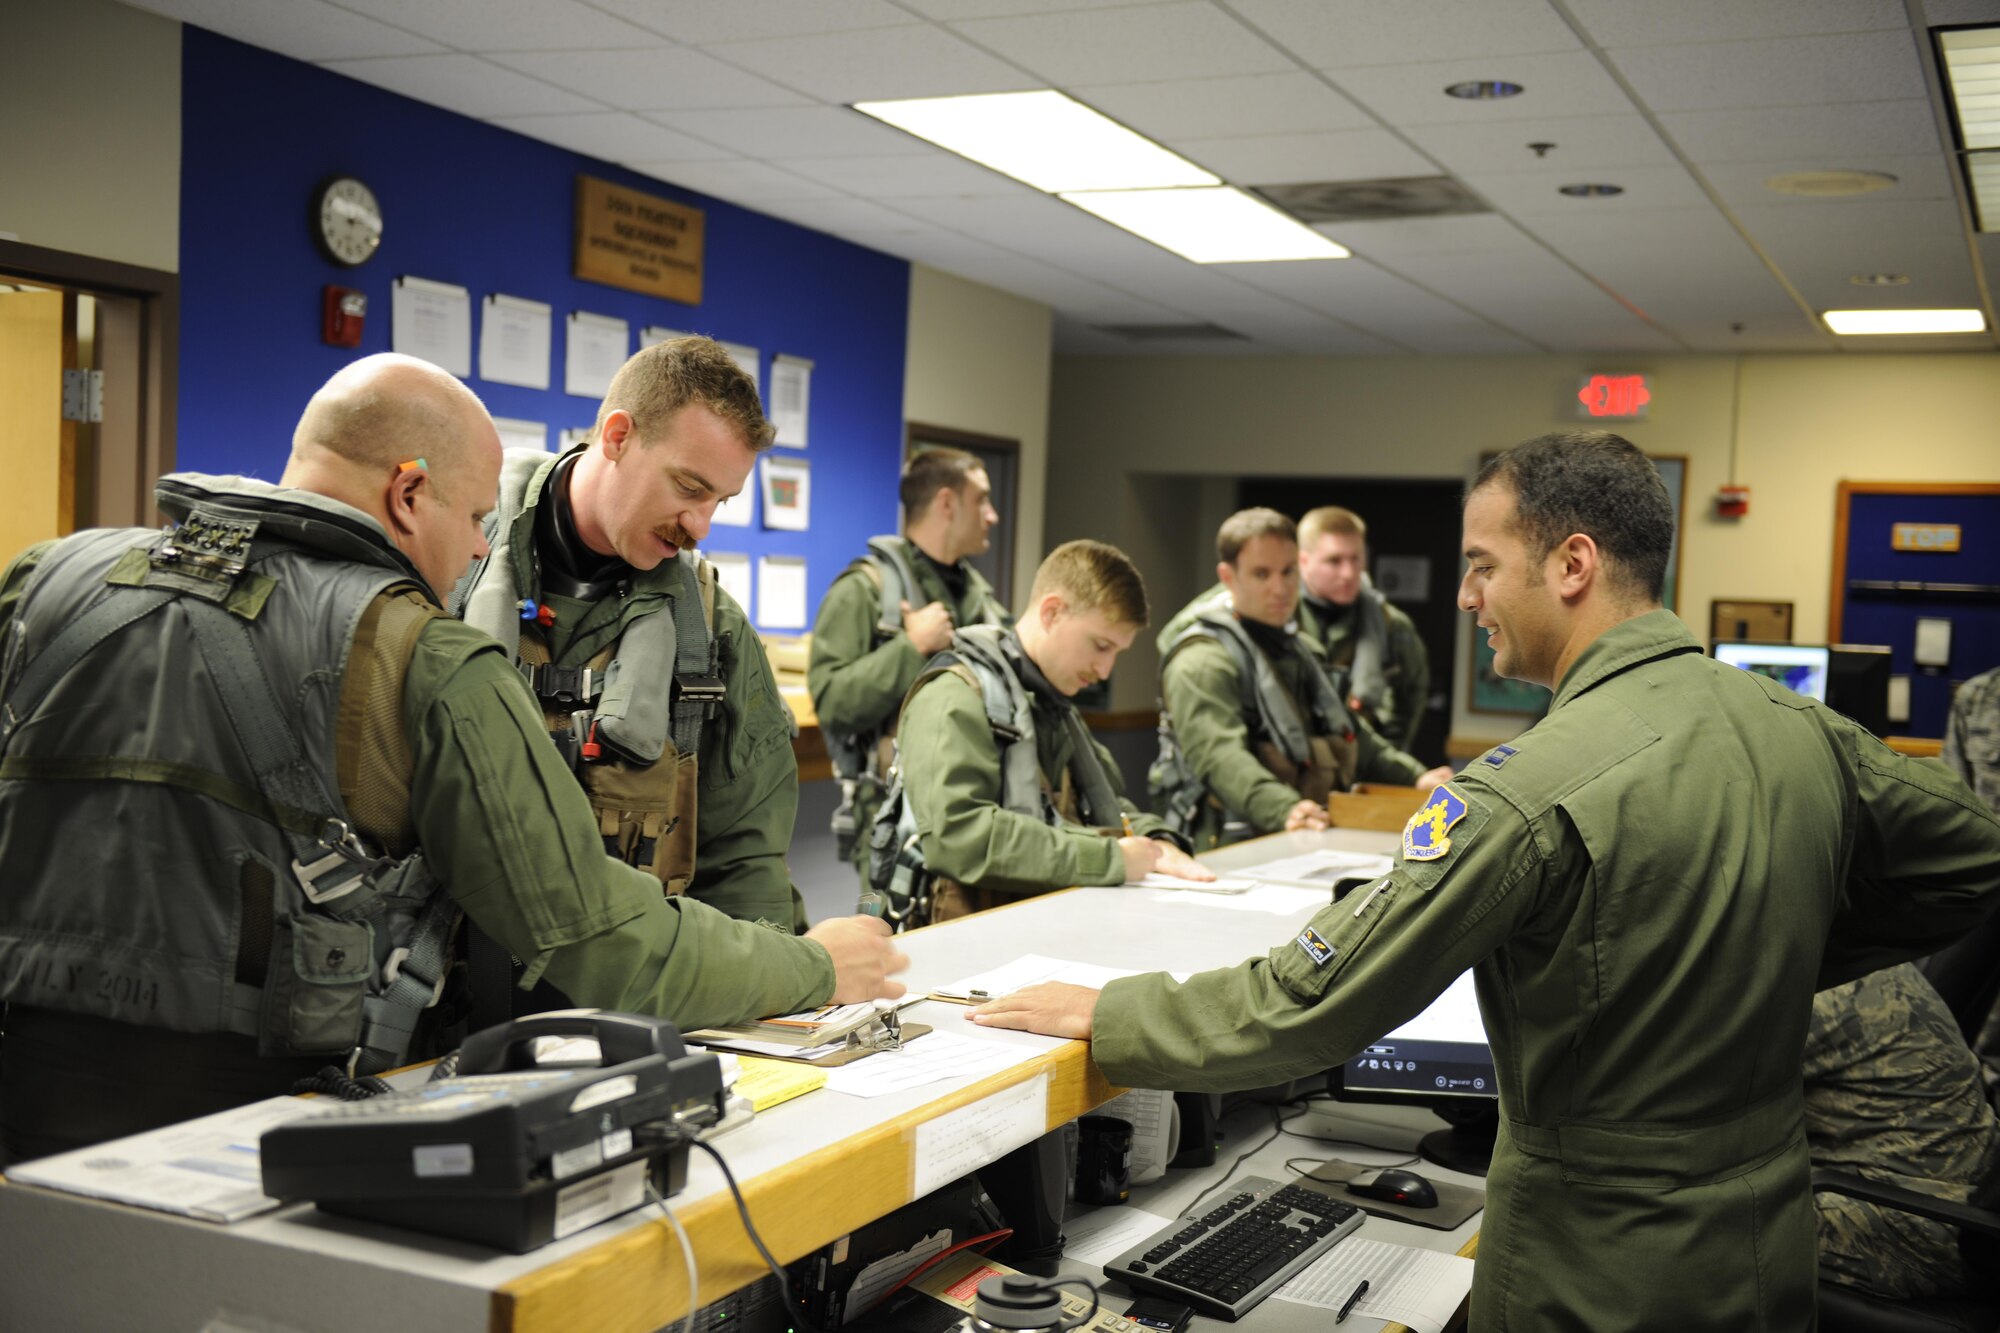 F-16 Fighting Falcon pilots from the 35th Fighter Squadron, receives their step briefing at Kunsan Air Base, Republic of Korea, during Buddy Wing 16-4, May 11, 2016. Buddy Wing exercises are conducted at various ROKAF and U.S. Air Force bases multiple times throughout the year in order to practice interoperability between the U.S. and the ROKAF. (U.S. Air Force photo by Senior Airman Dustin King/Released)